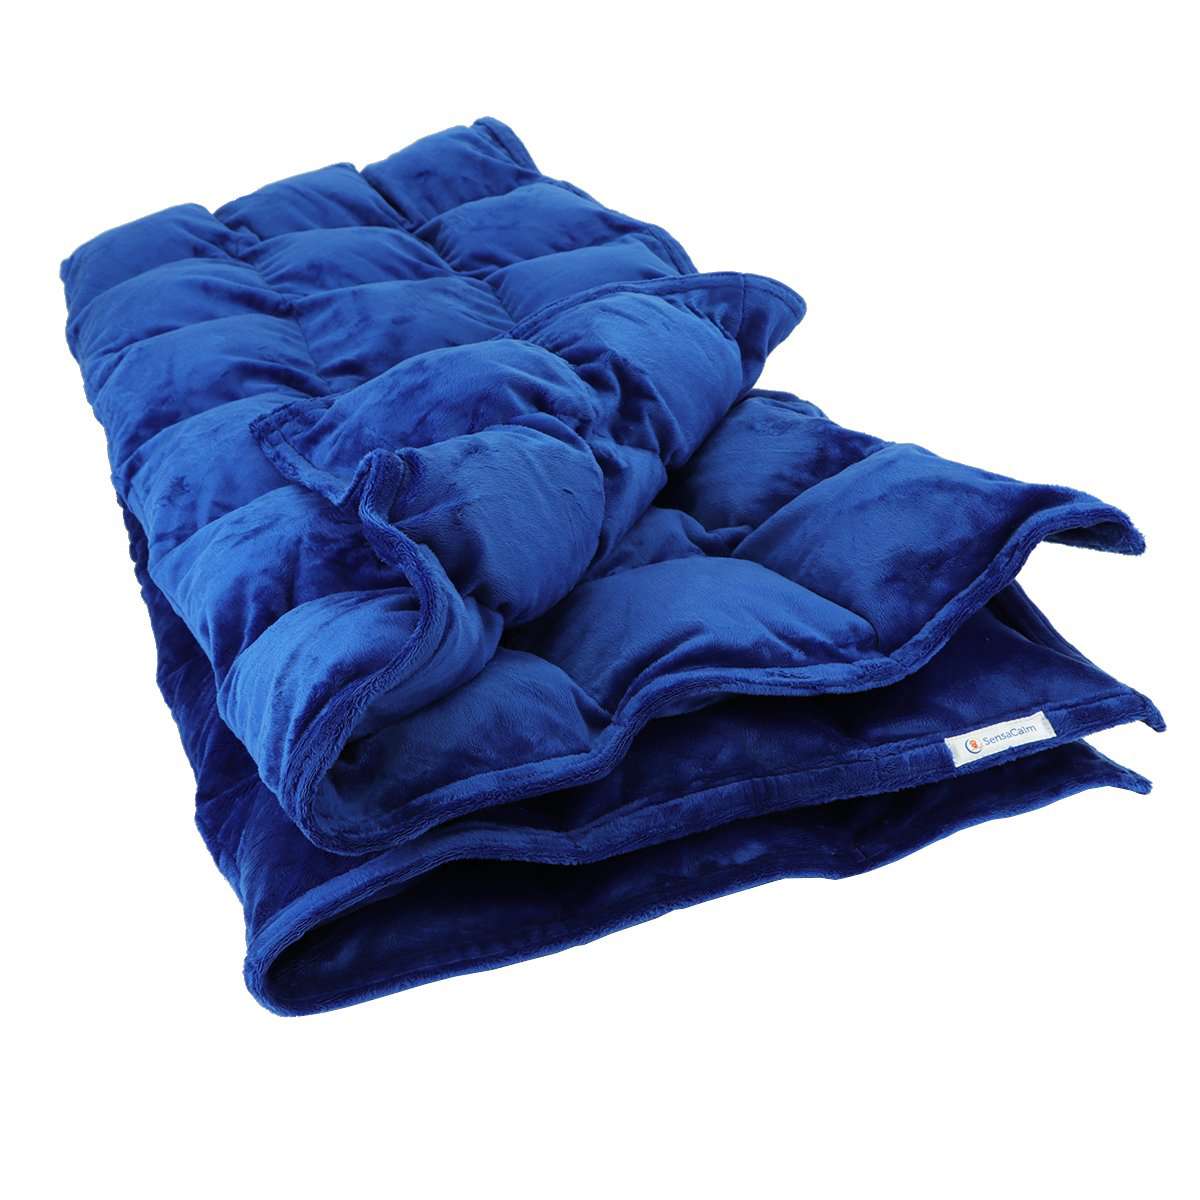 Cuddle Weighted Blanket - Blue